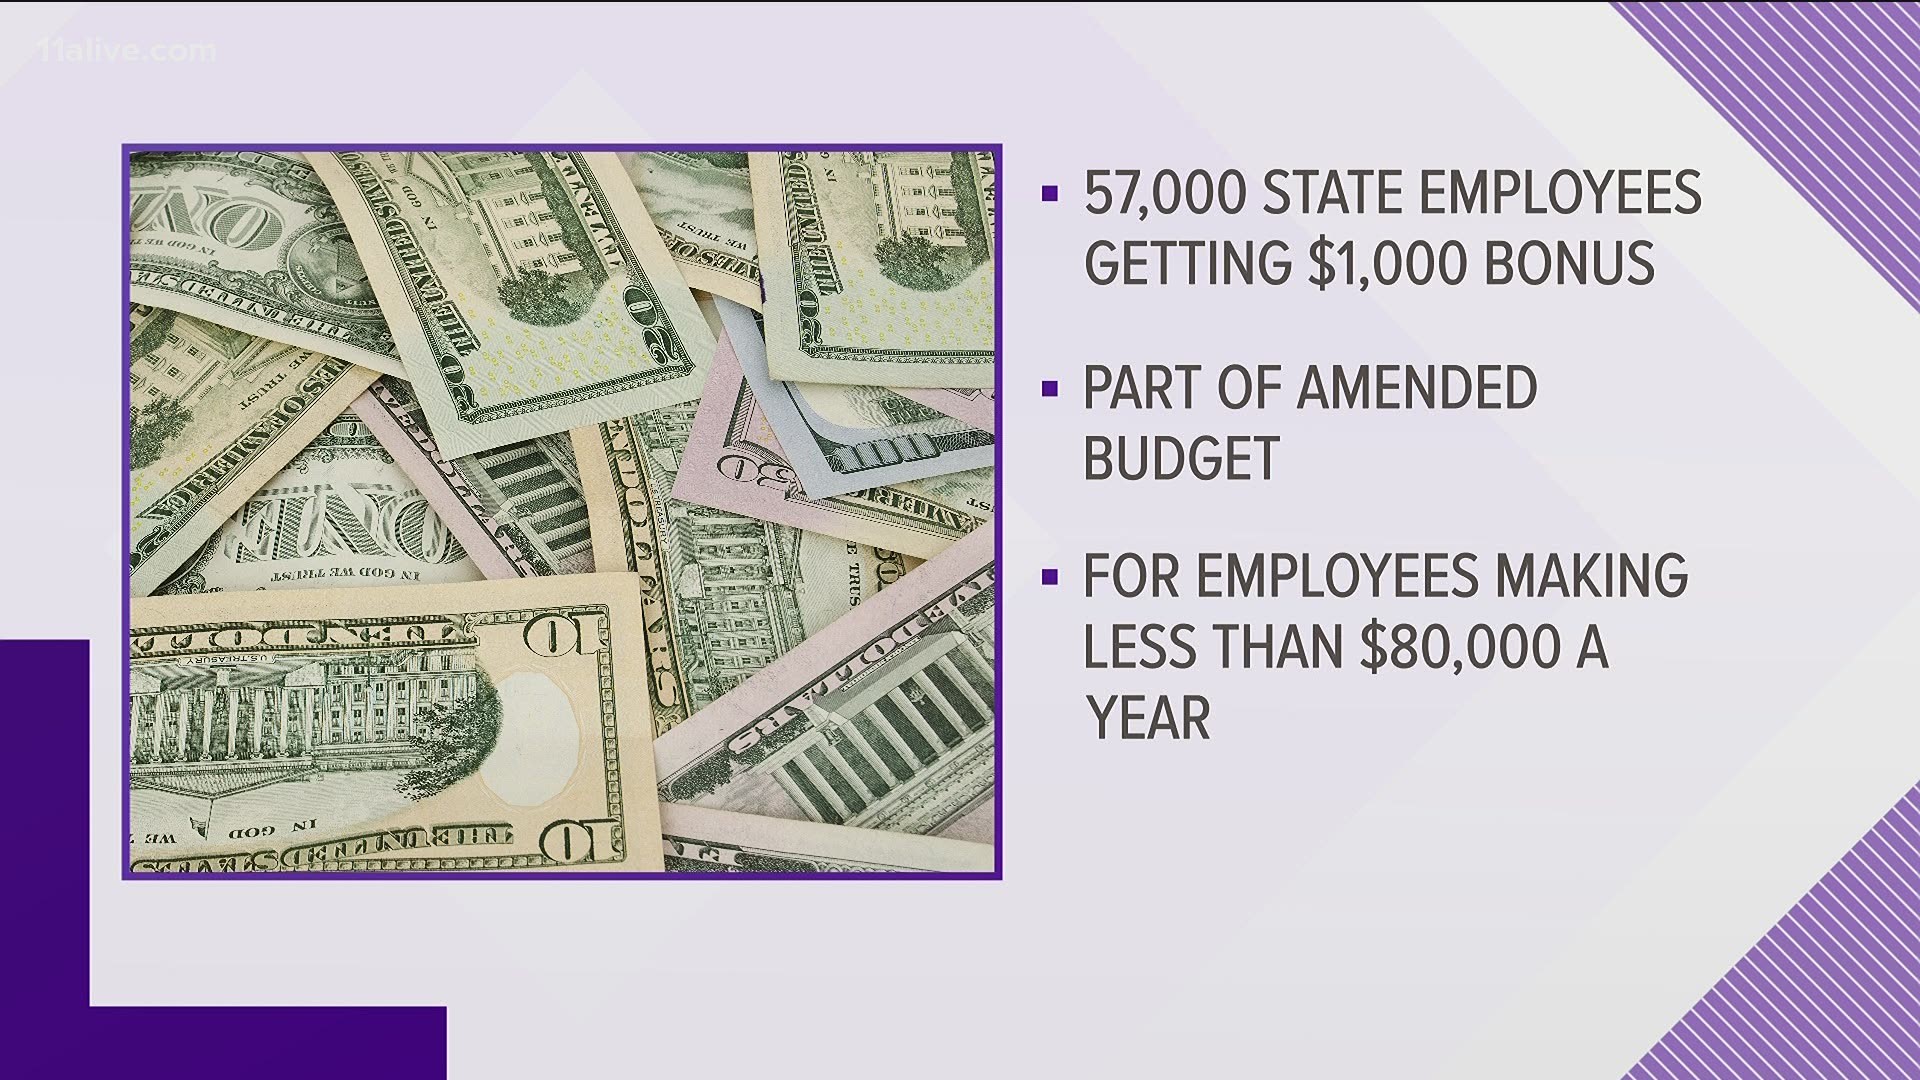 Roughly 57,000 employees will get the bonus, announced as part of the amended budget for this fiscal year.